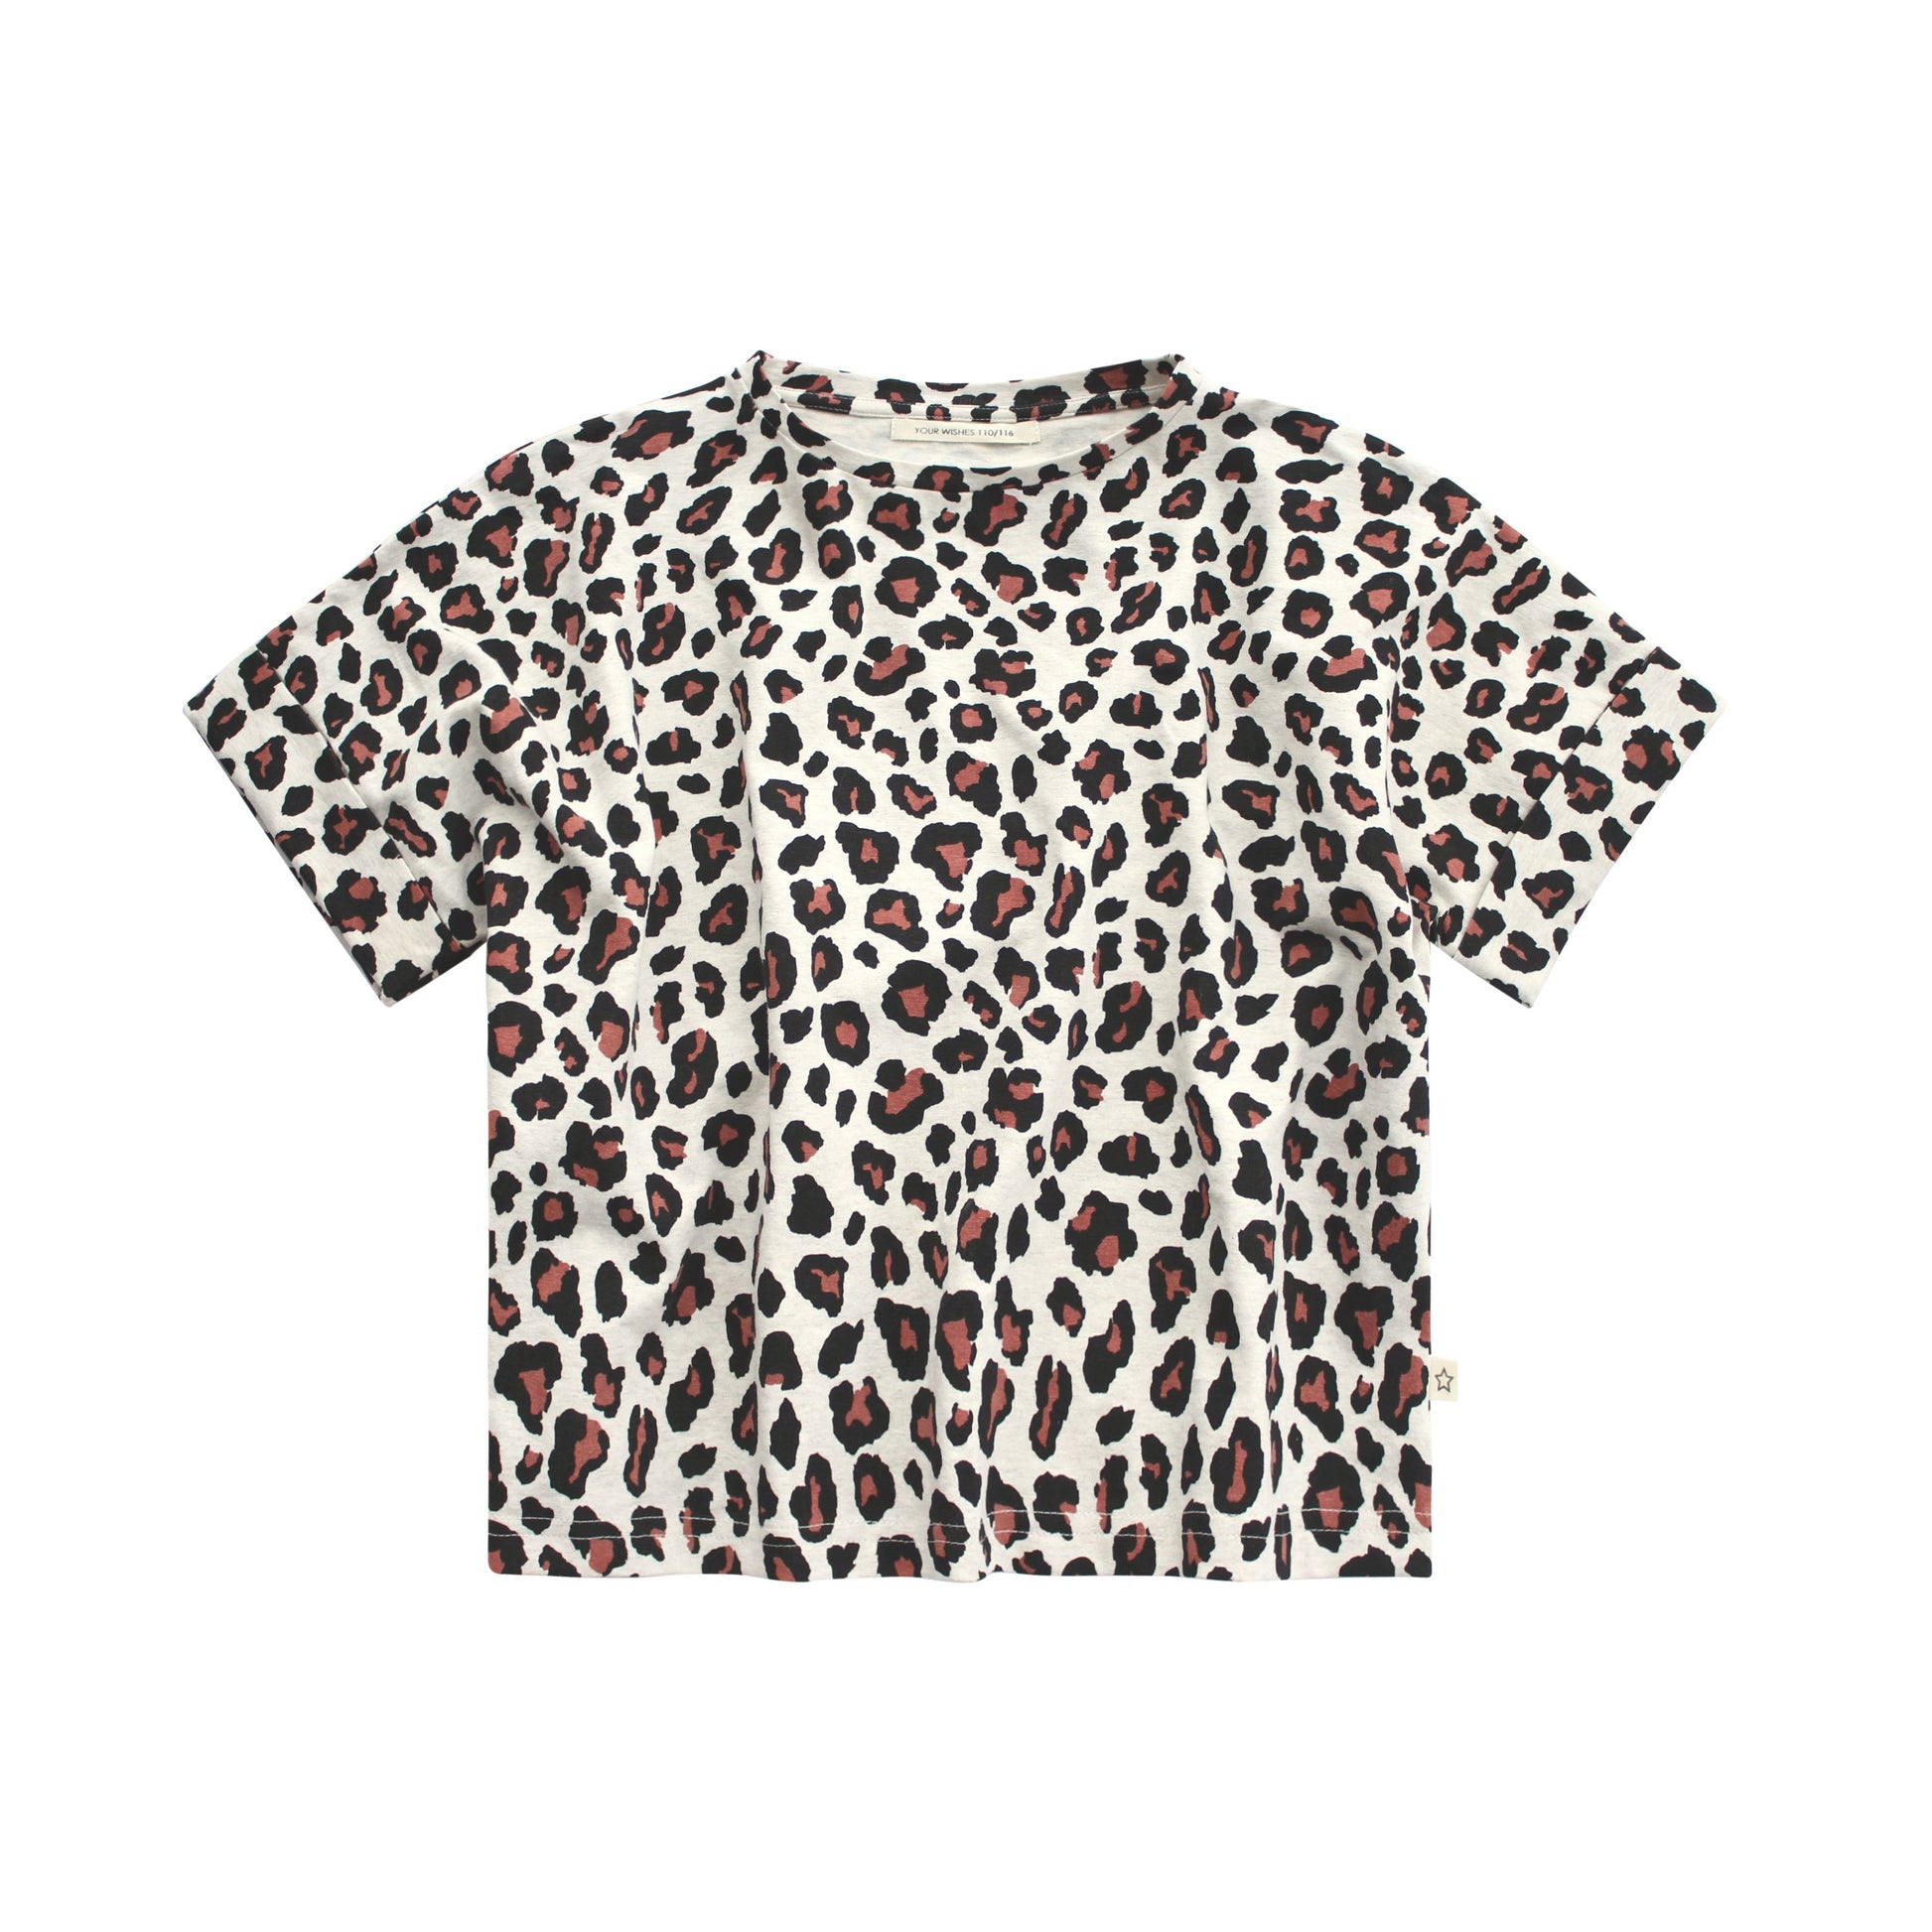 Your Wishes Leopard Wide Tee - Meisjes Shirt - Multicolor1